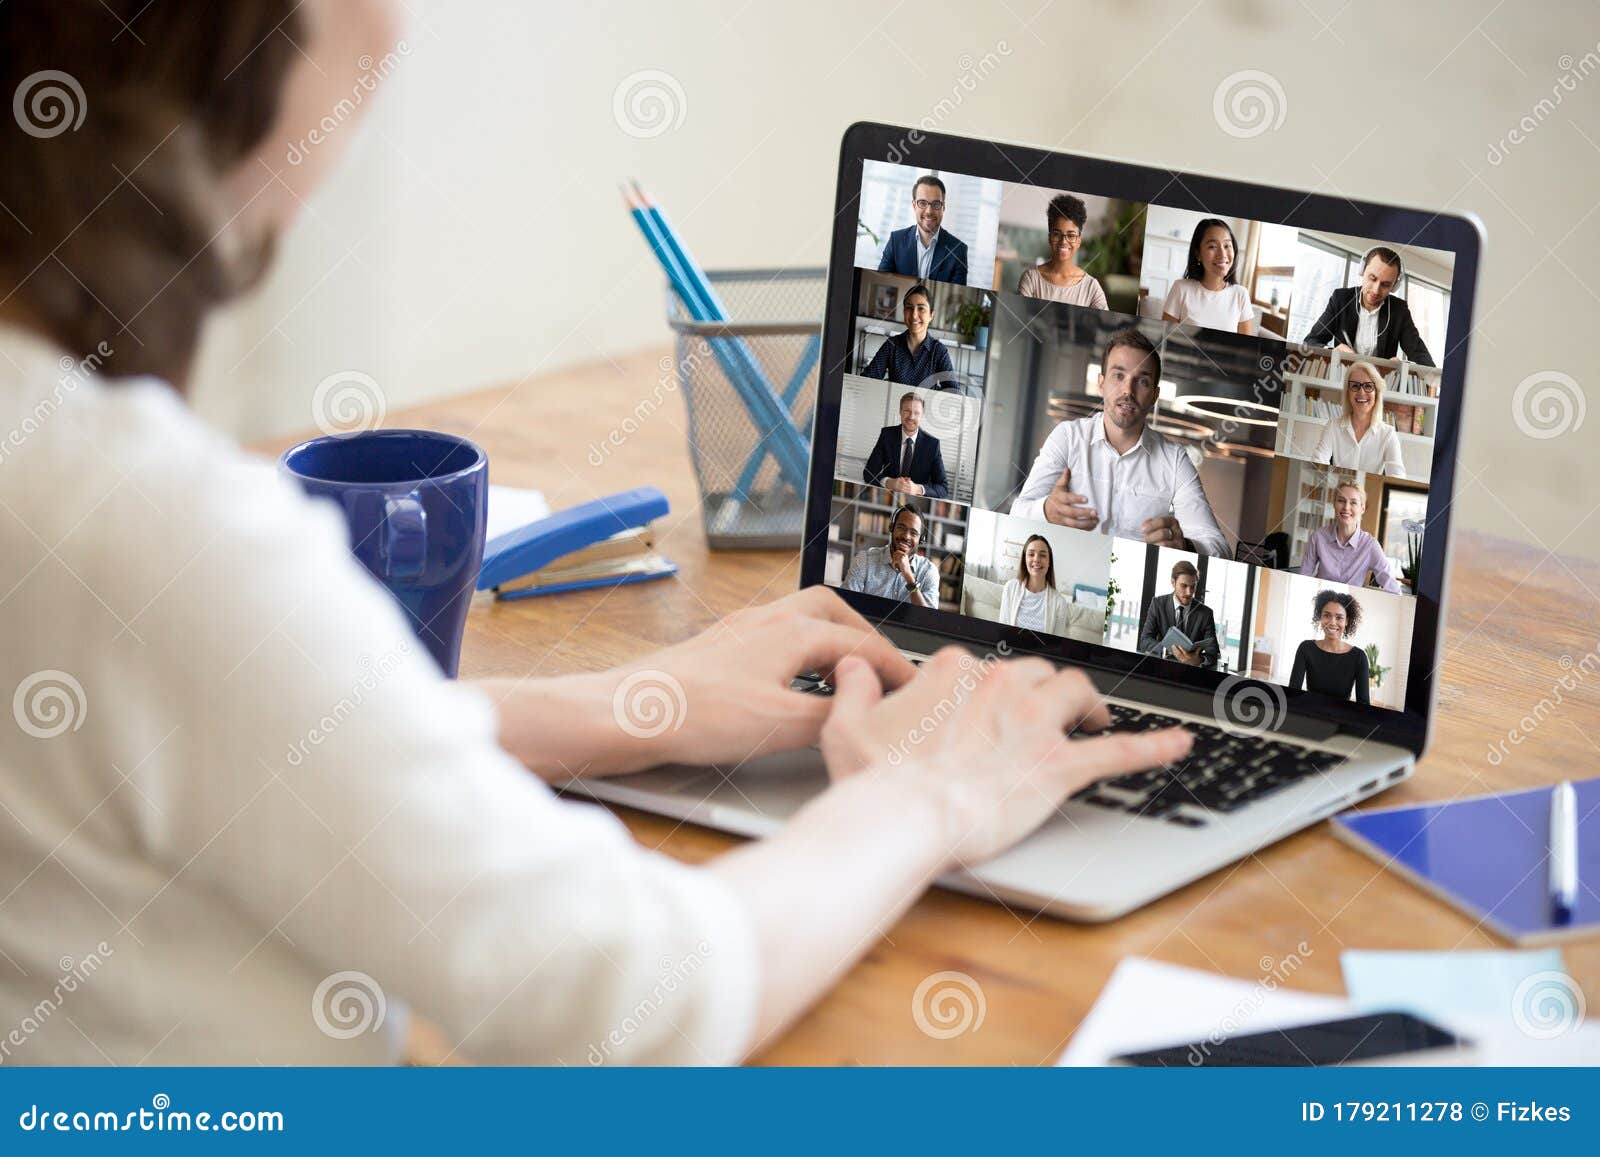 laptop screen view diverse businesspeople involved at group videocall